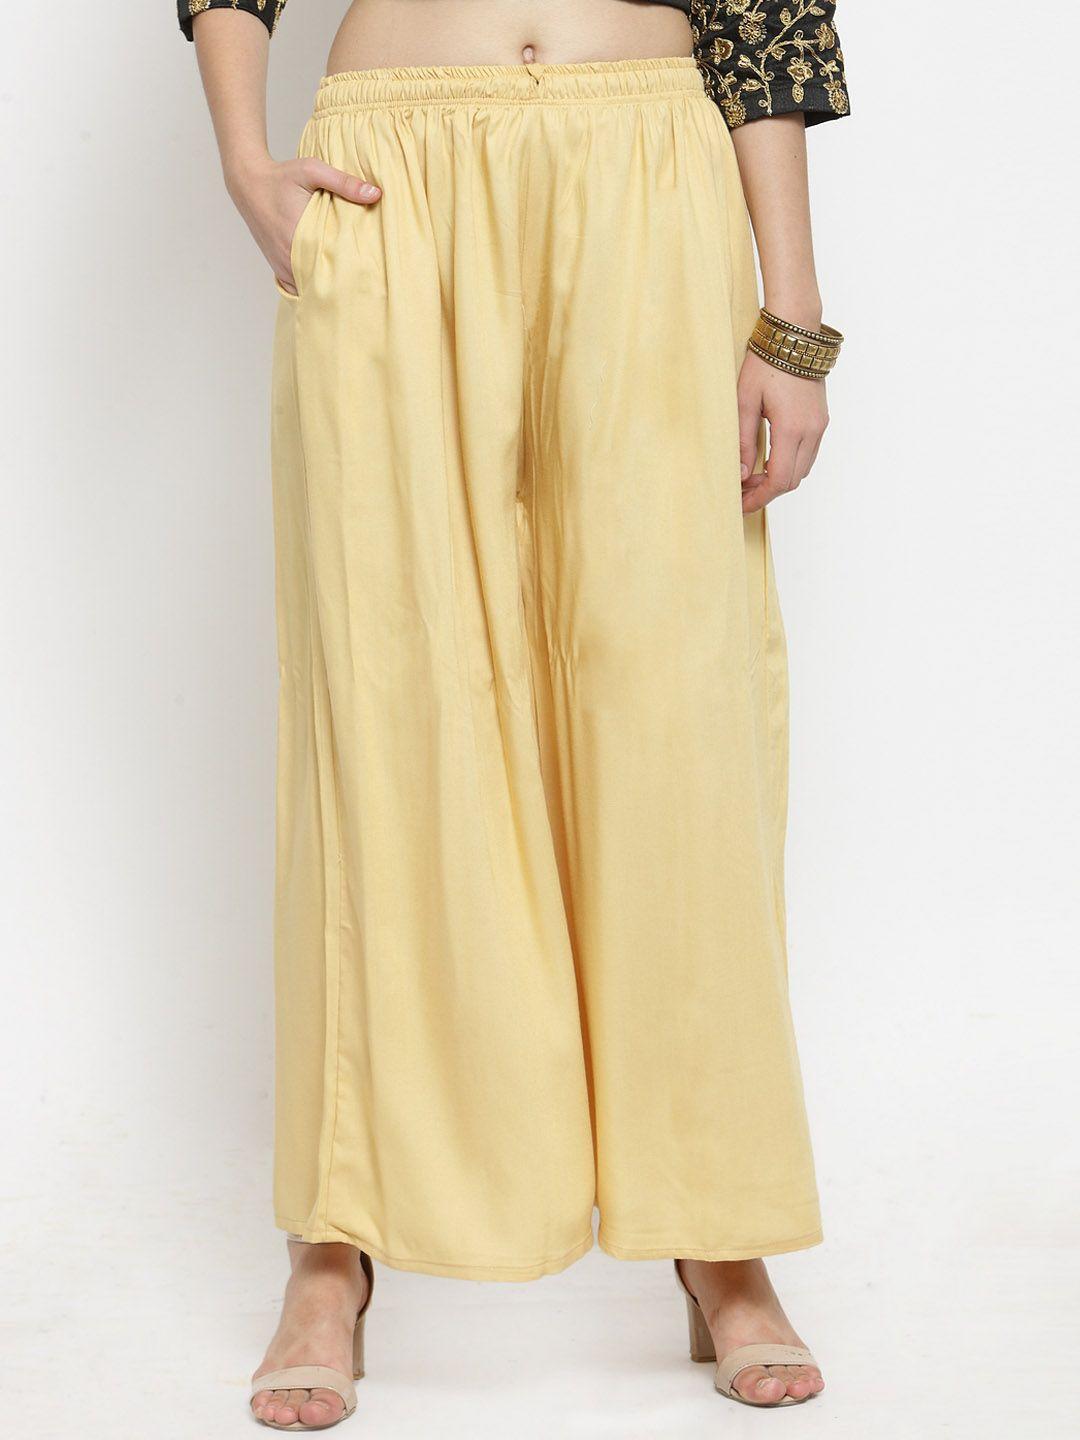 clora creation women yellow flared solid palazzos